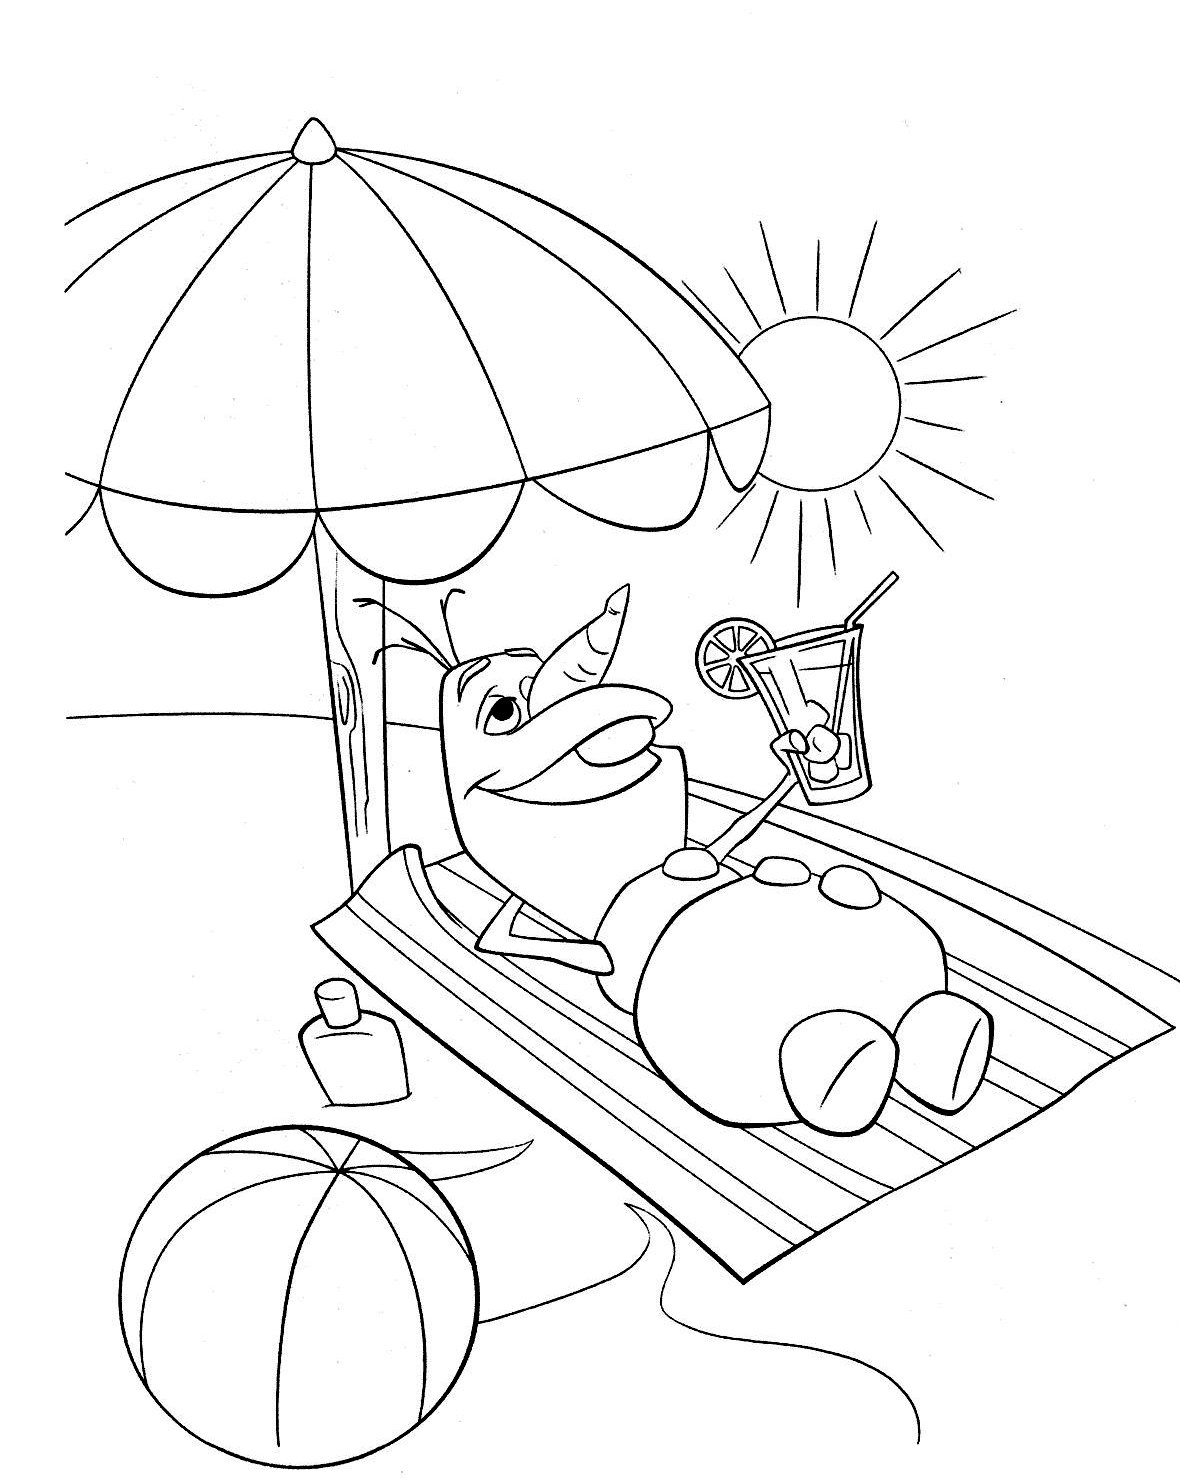 summertime coloring pages blogginess september 2012 summertime pages coloring 